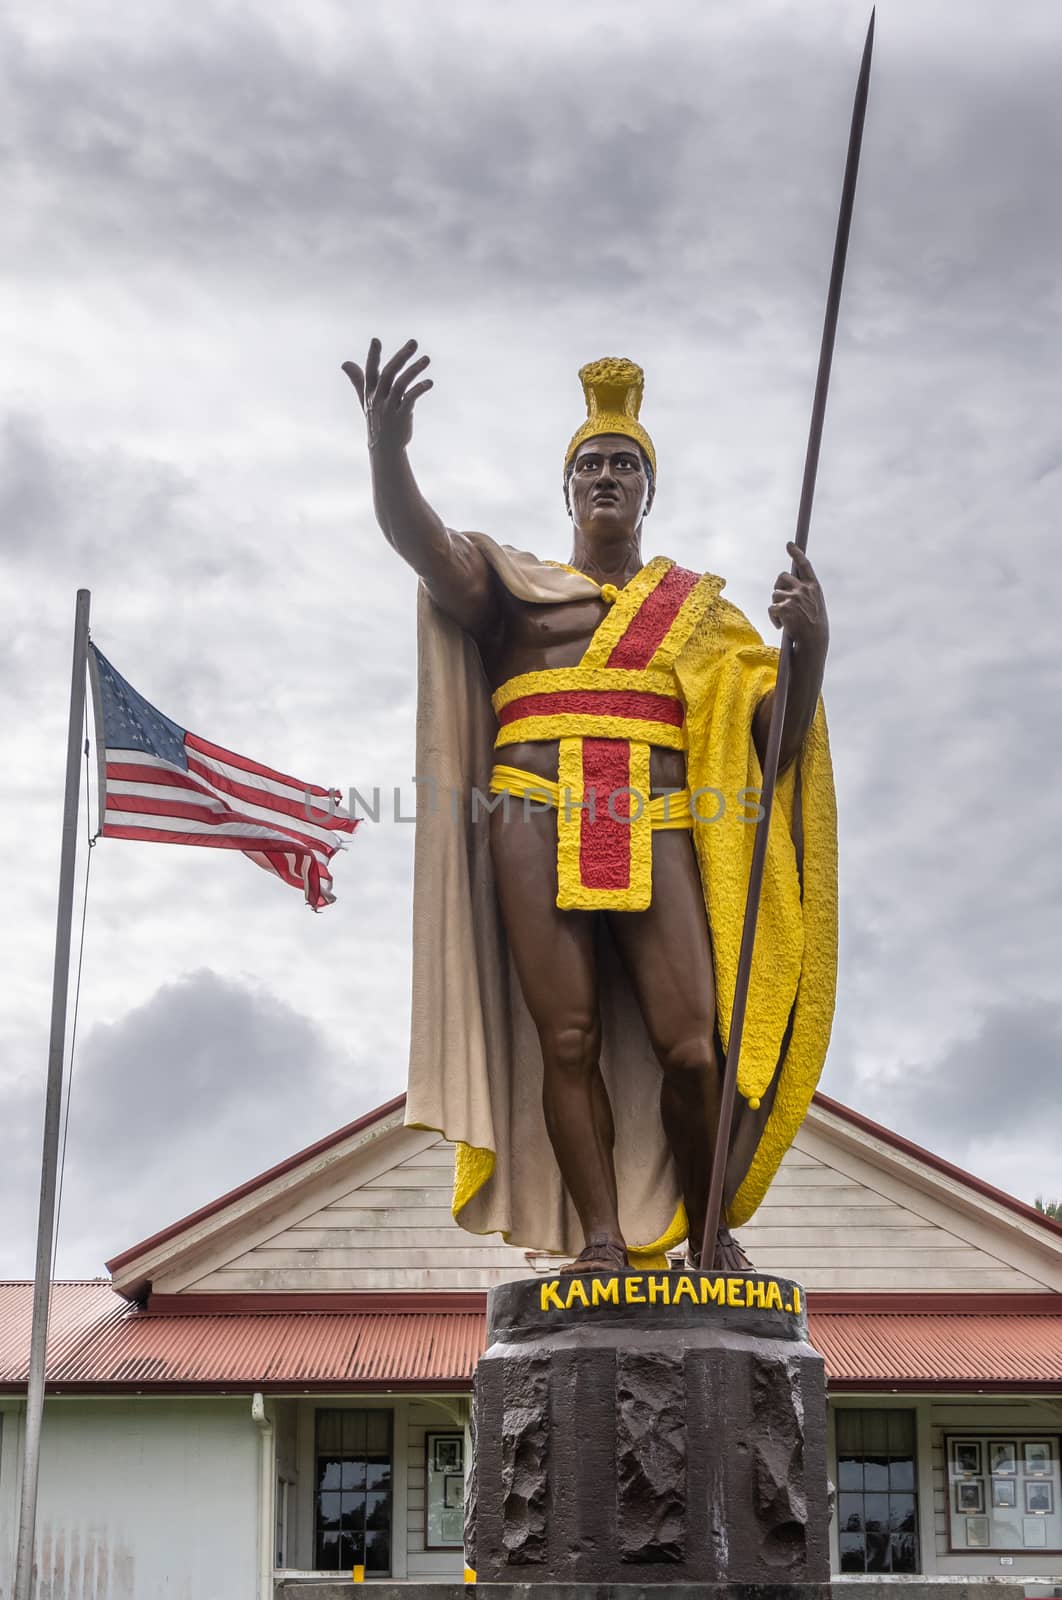 Kapaau, Hawaii, USA. - January 15, 2020: Closeup of statue of King Kamehameha, decorated with yellow and red dress, golden crown and long spear under gray cloudscape with USA flag behind.